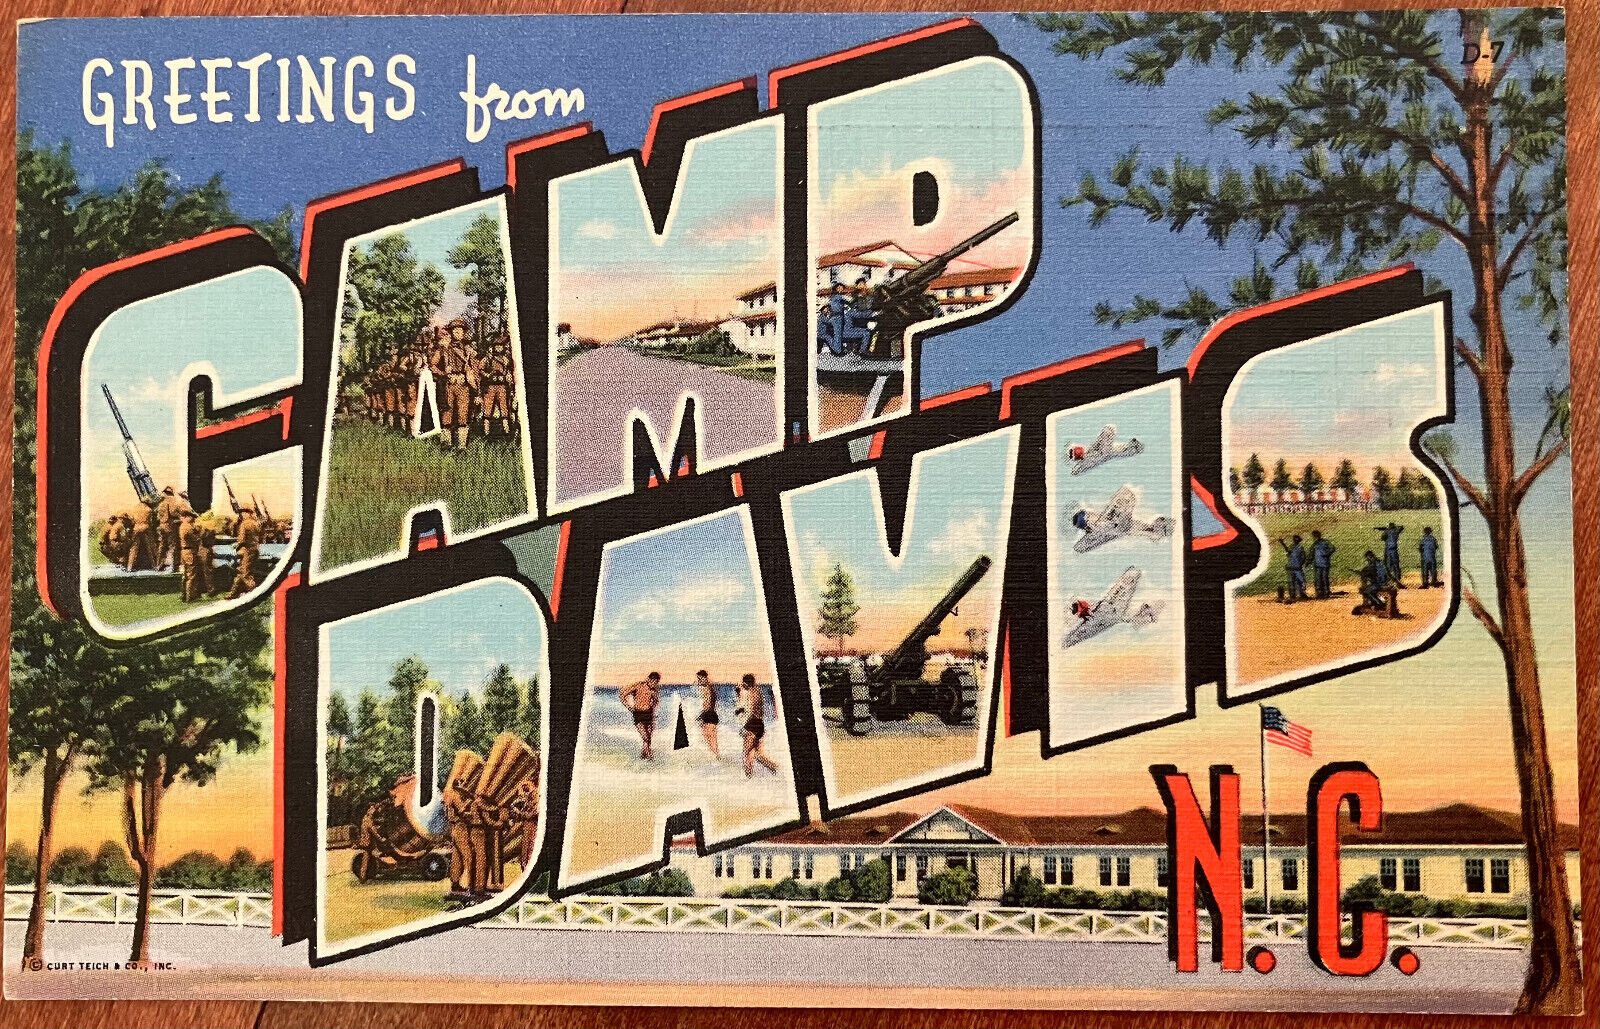 Military Base; Greetings From Camp Davis NC; Curt Teich Large Letter Linen PC